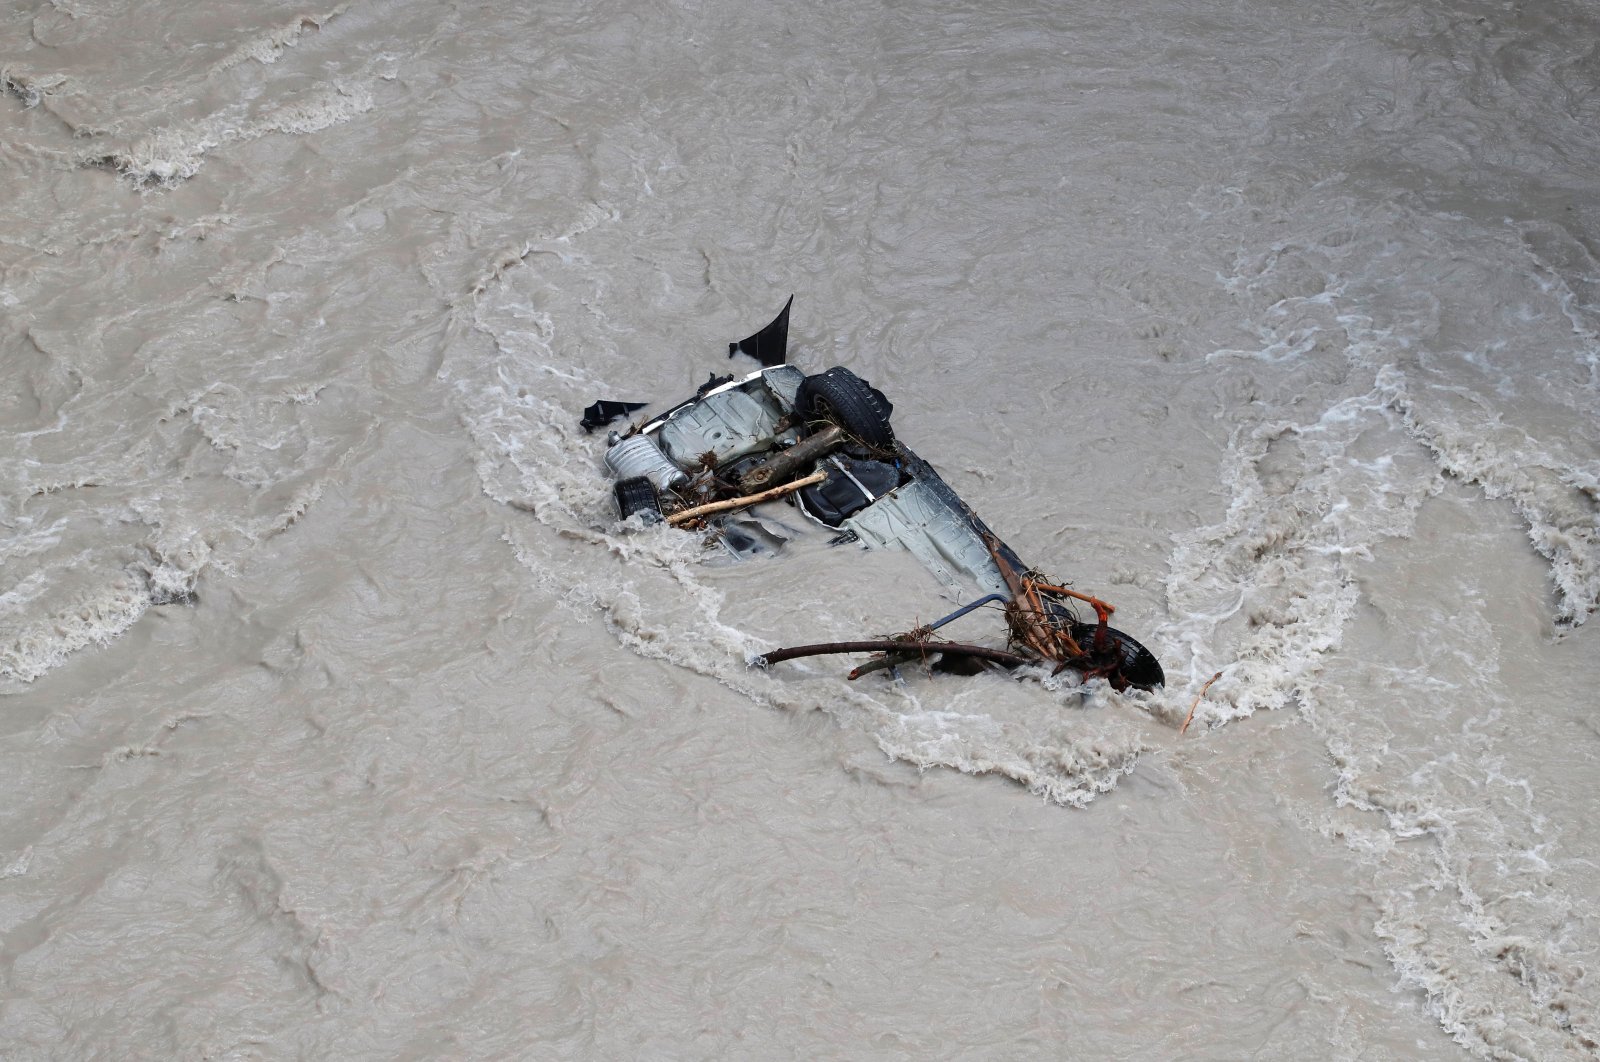 A damaged car is seen in the Roya river in Breil-sur-Roya as clean-up operations continue after storm Alex hit southern France, bringing record rainfall in places and causing heavy flooding that swept away roads and damaged homes, France, Oct. 5, 2020. (Reuters Photo)